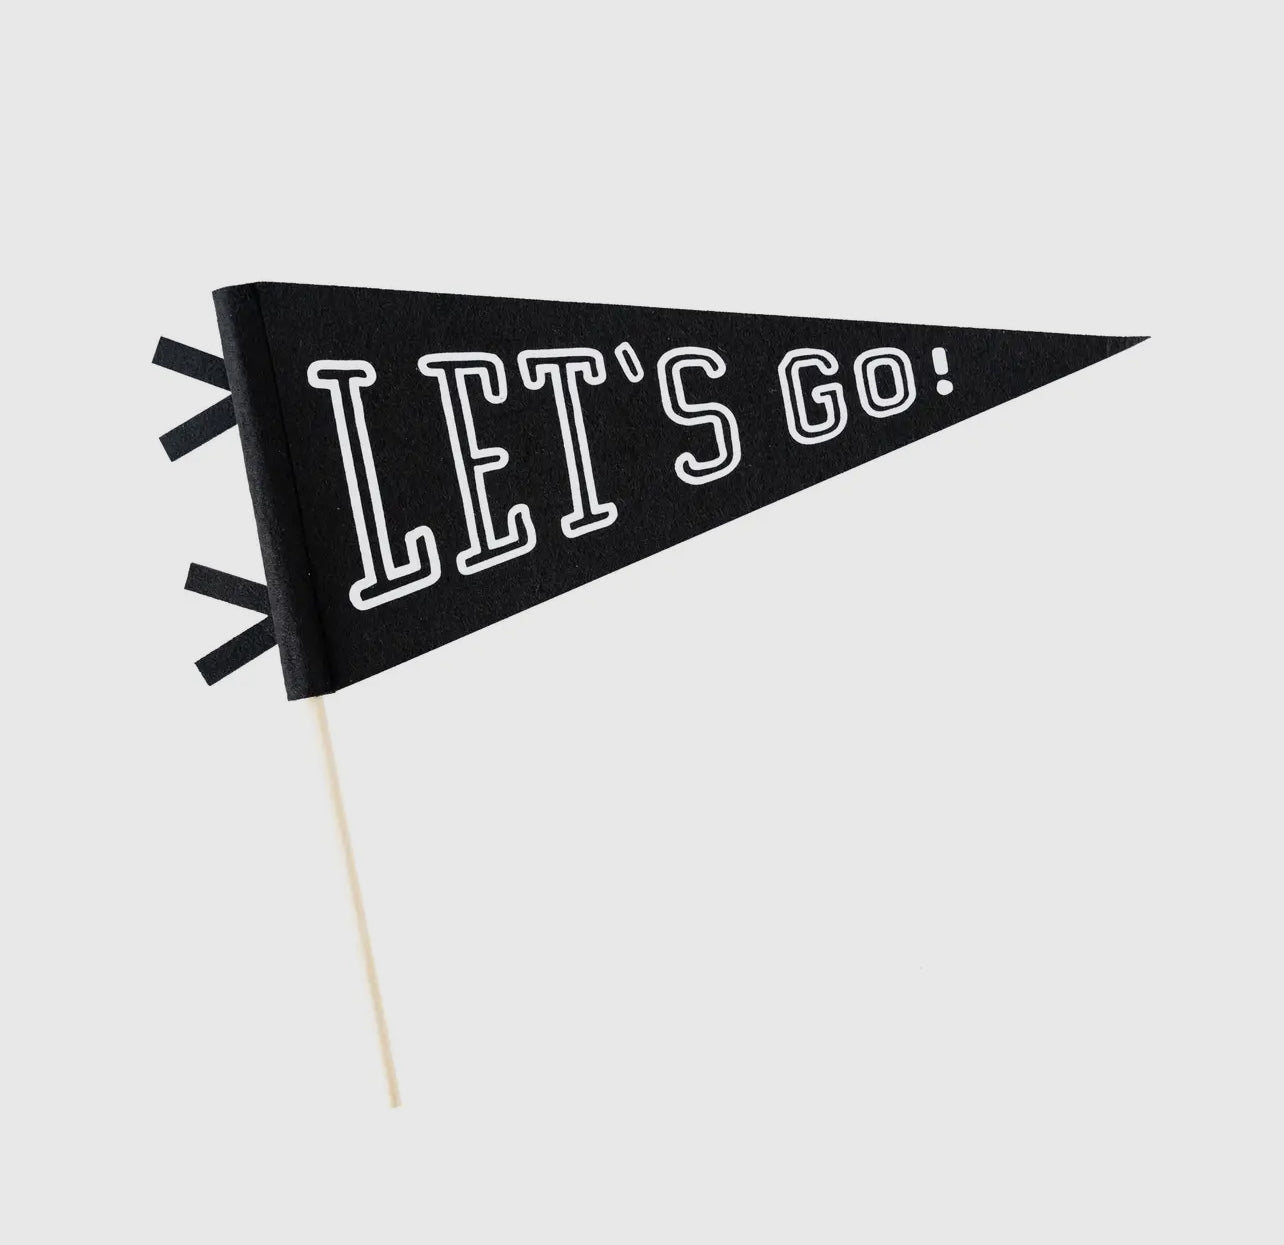 Game day “Let’s Go” pennant includes red and gold ribbons.